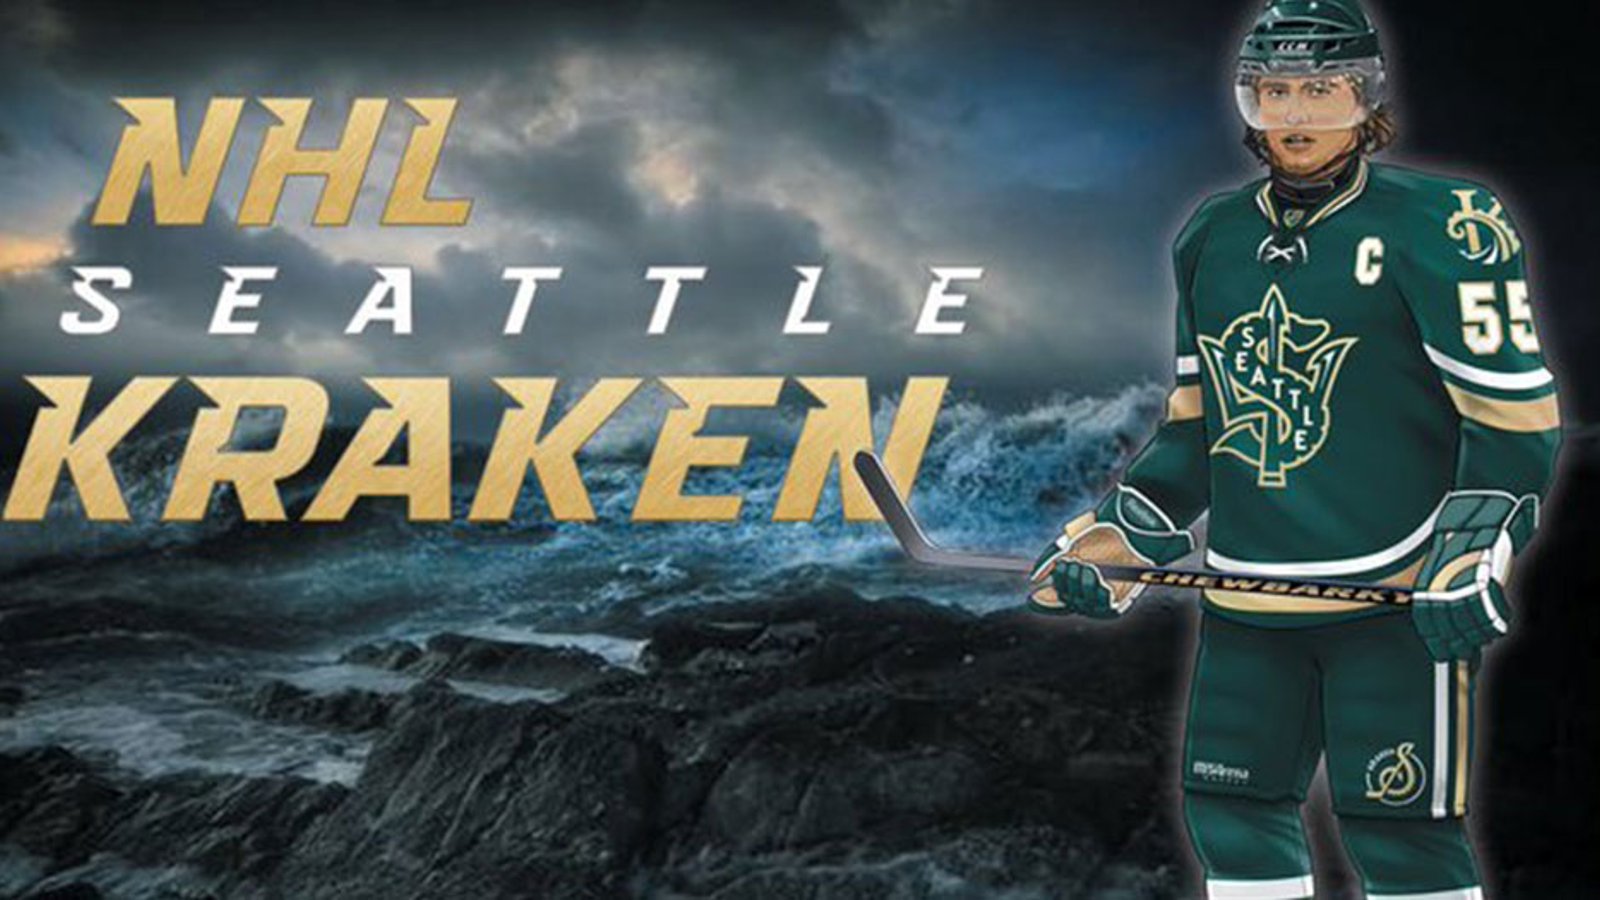 The Kraken Has Been Released - NHL to SEATTLE